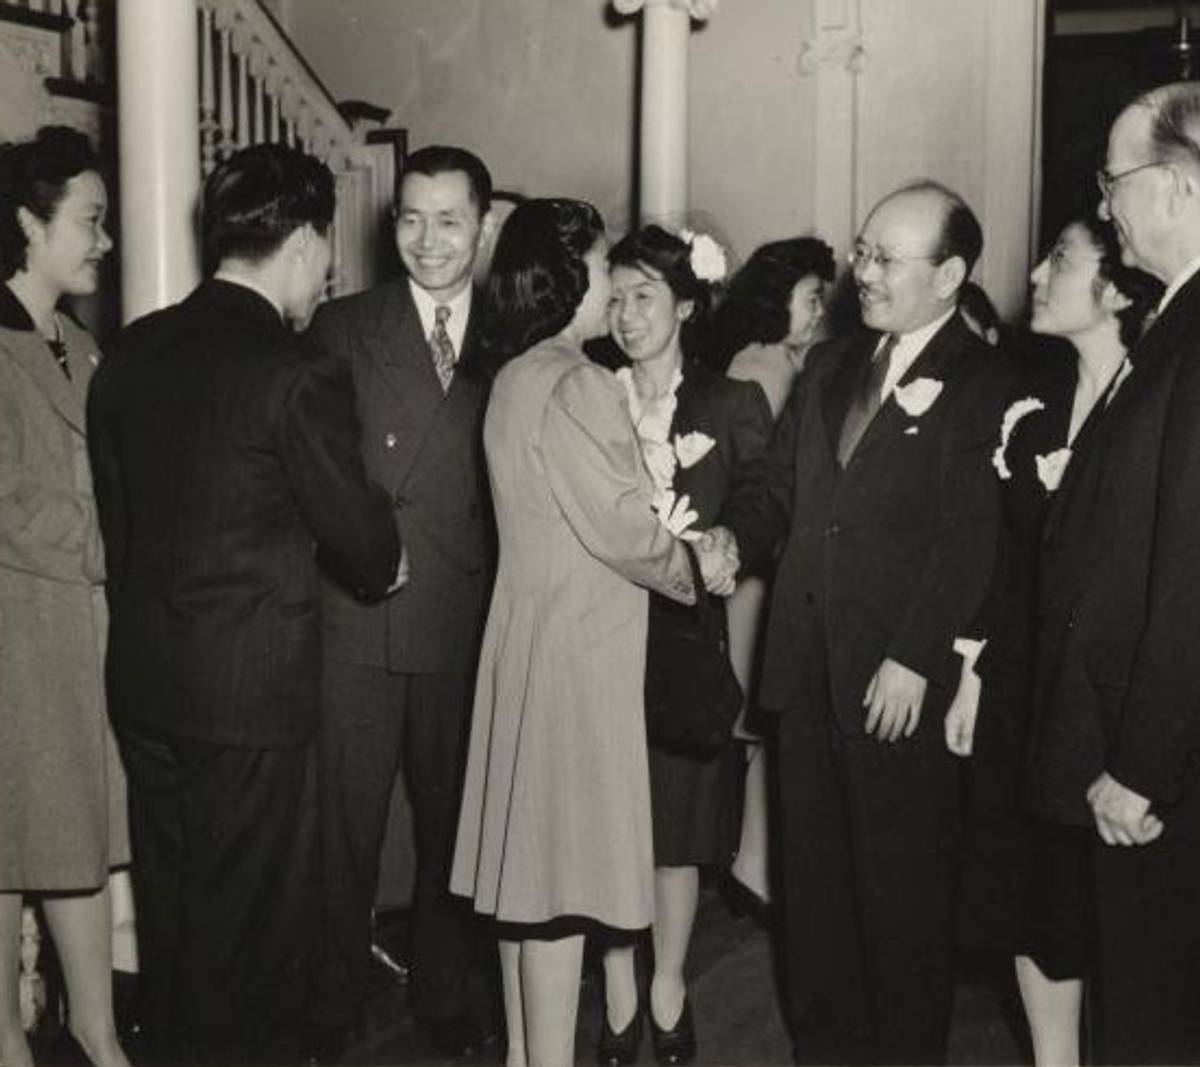 Frances Adachi and her parents, at far left, at an event at the Japanese Methodist Church in New York City, 1944